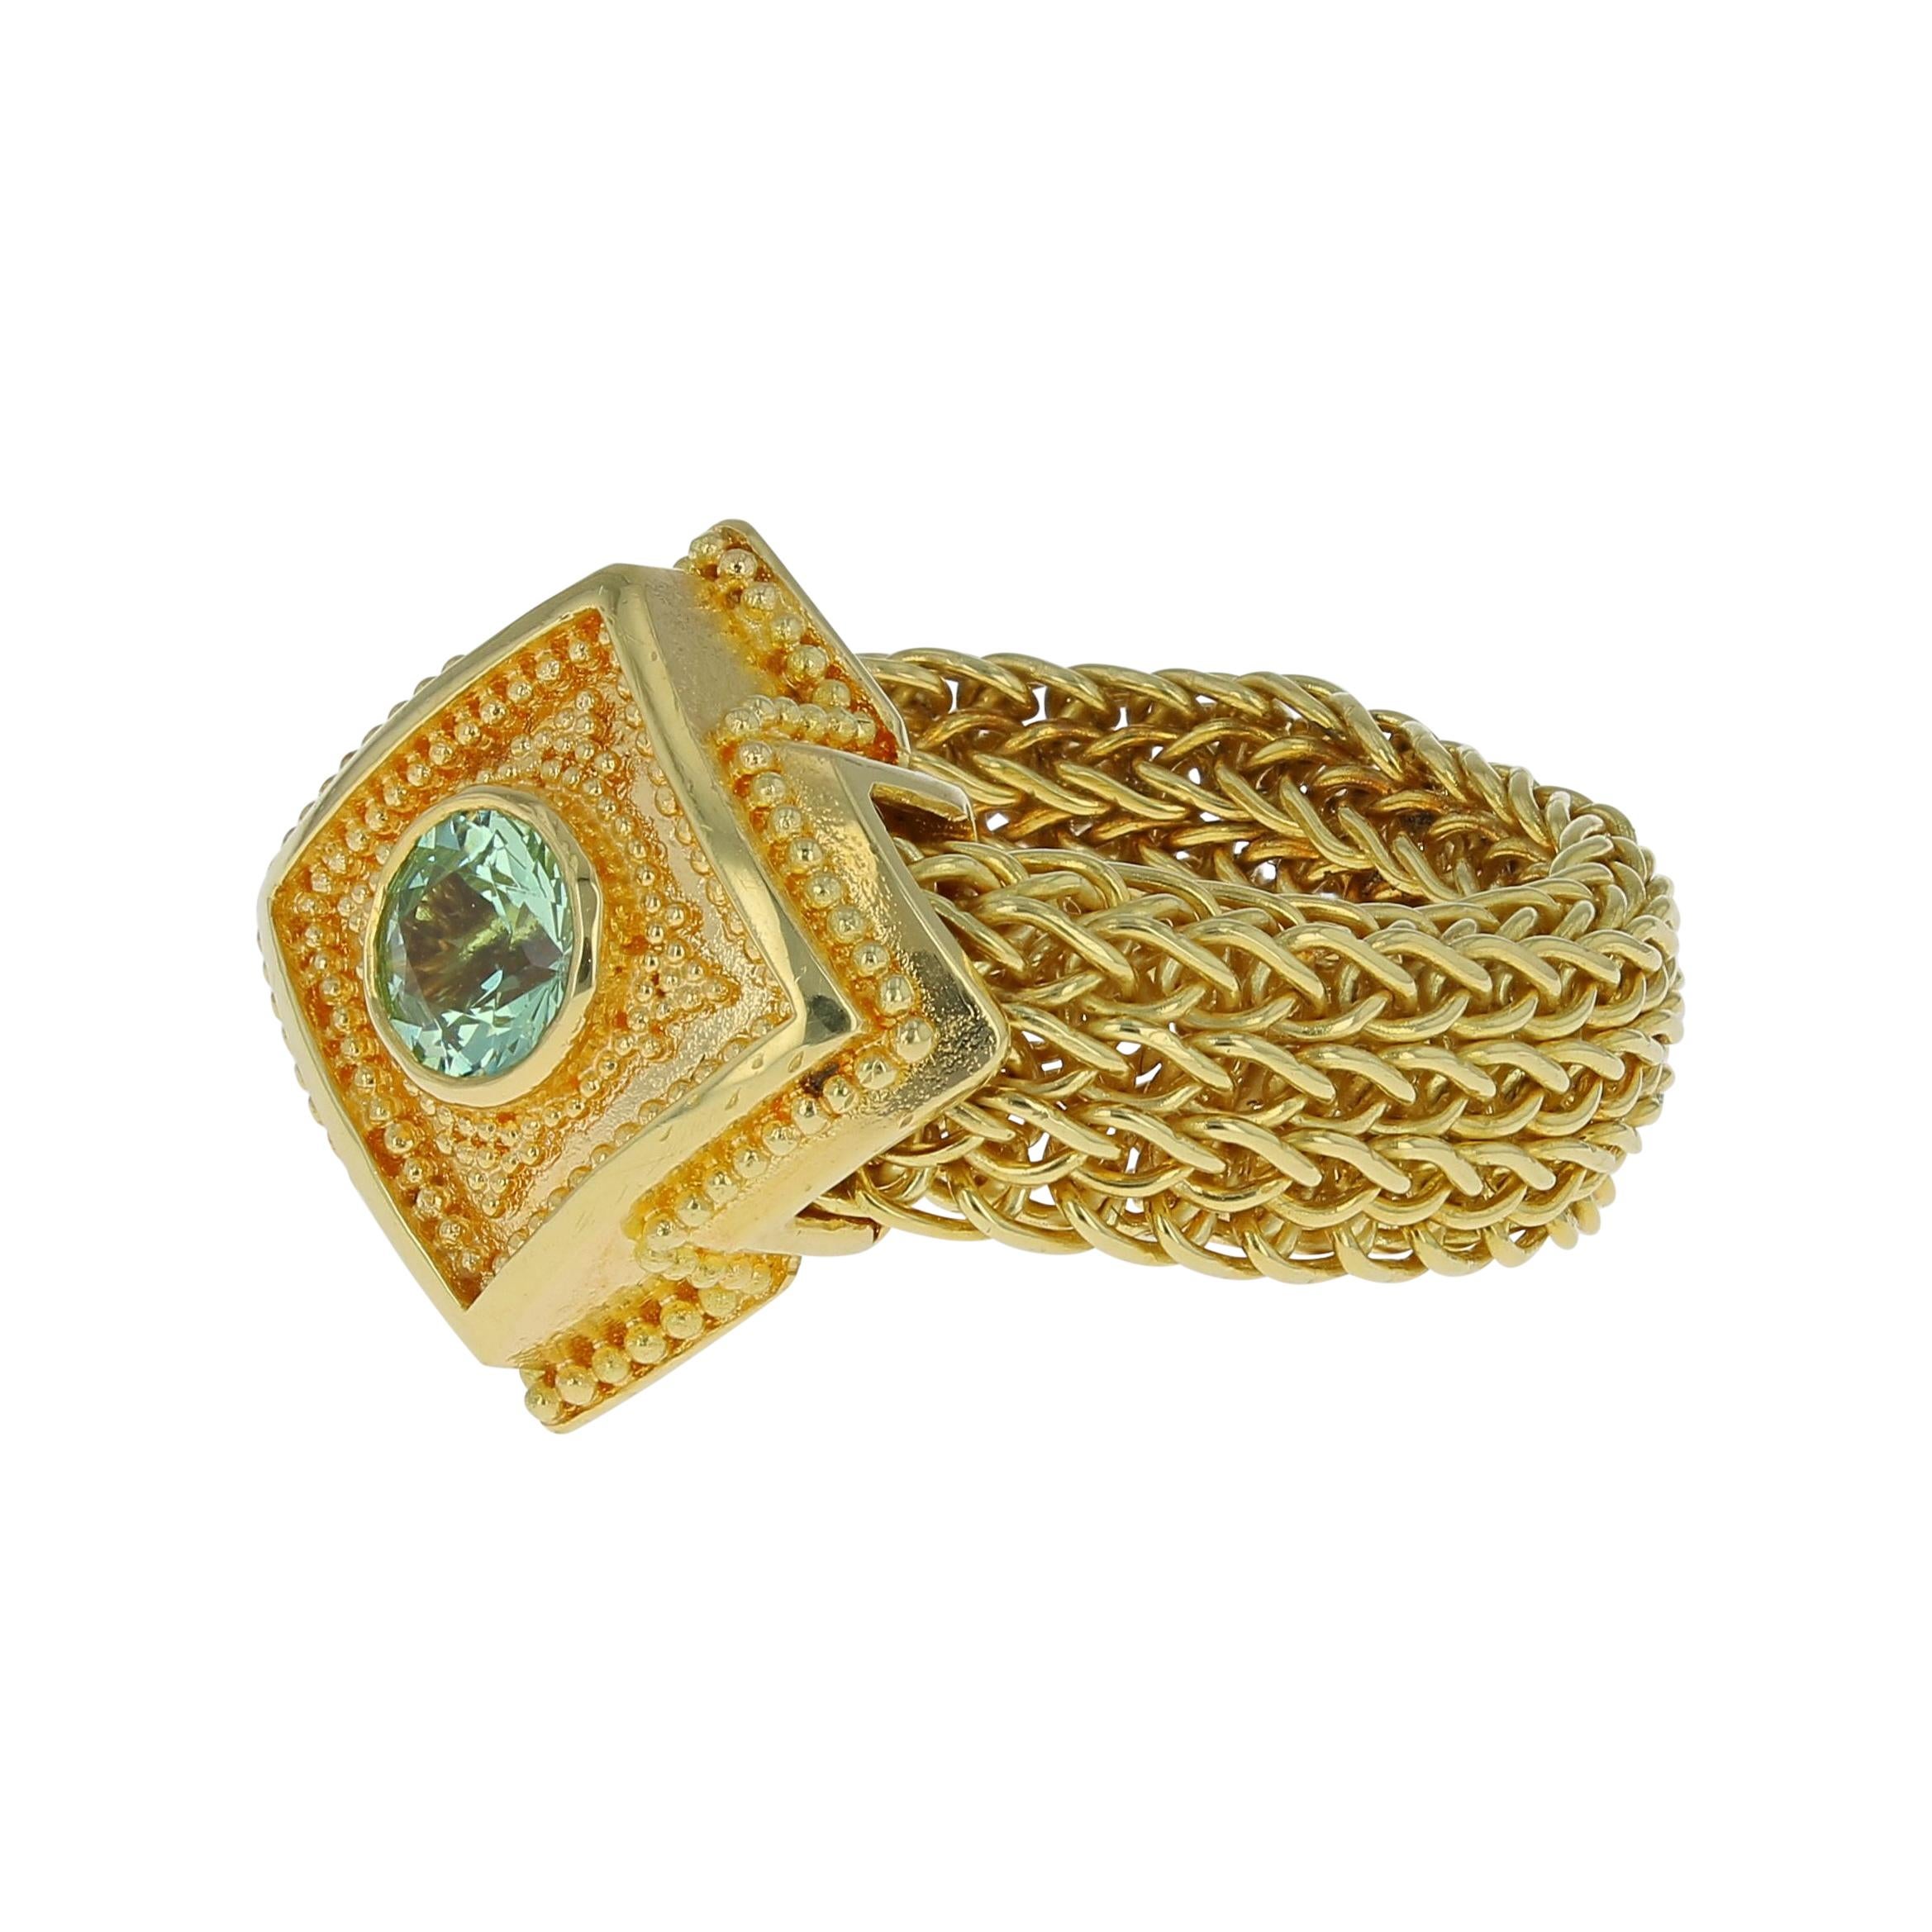 A unique ring from the Kent Raible 'Studio Collection'! This ring features the Raible classic gold granulation, but uses a flexible mesh, hand woven chain band! The soft Green Grossular Garnet adds a wonderful sparkle to this unique design. Do you